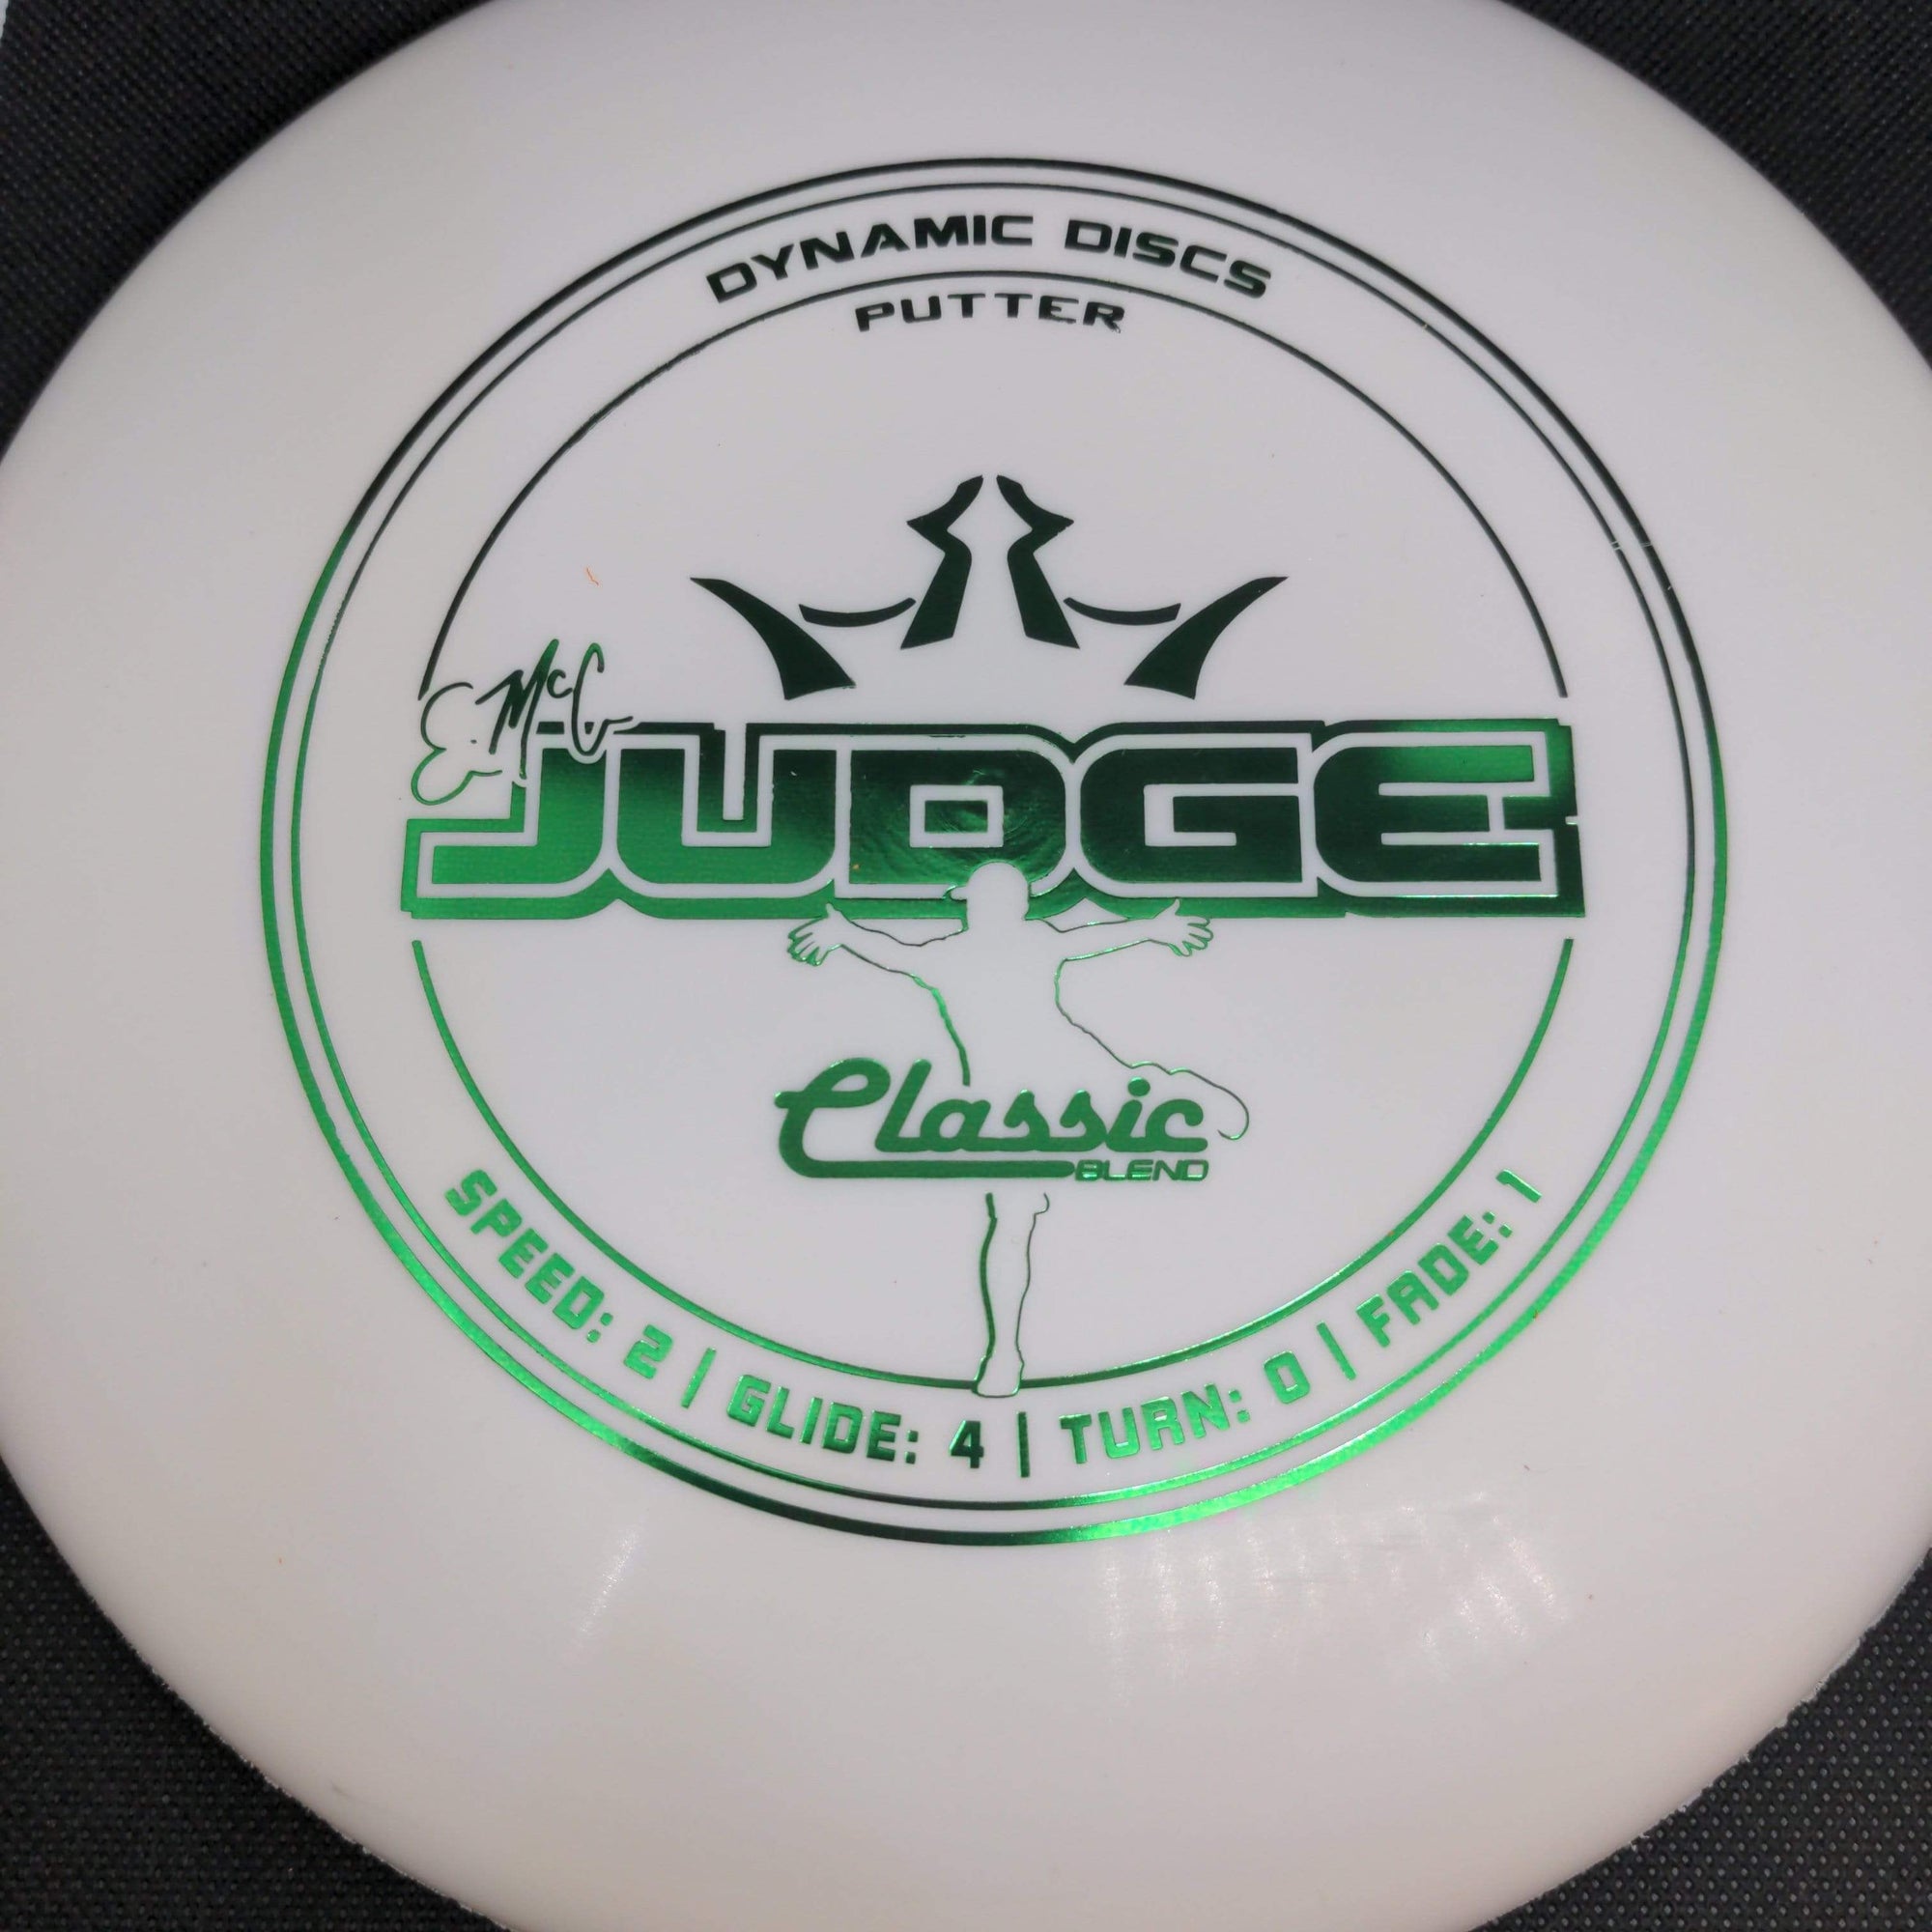 Dynamic Discs Putter White Green Stamp 173g Classic Blend EMAC Judge